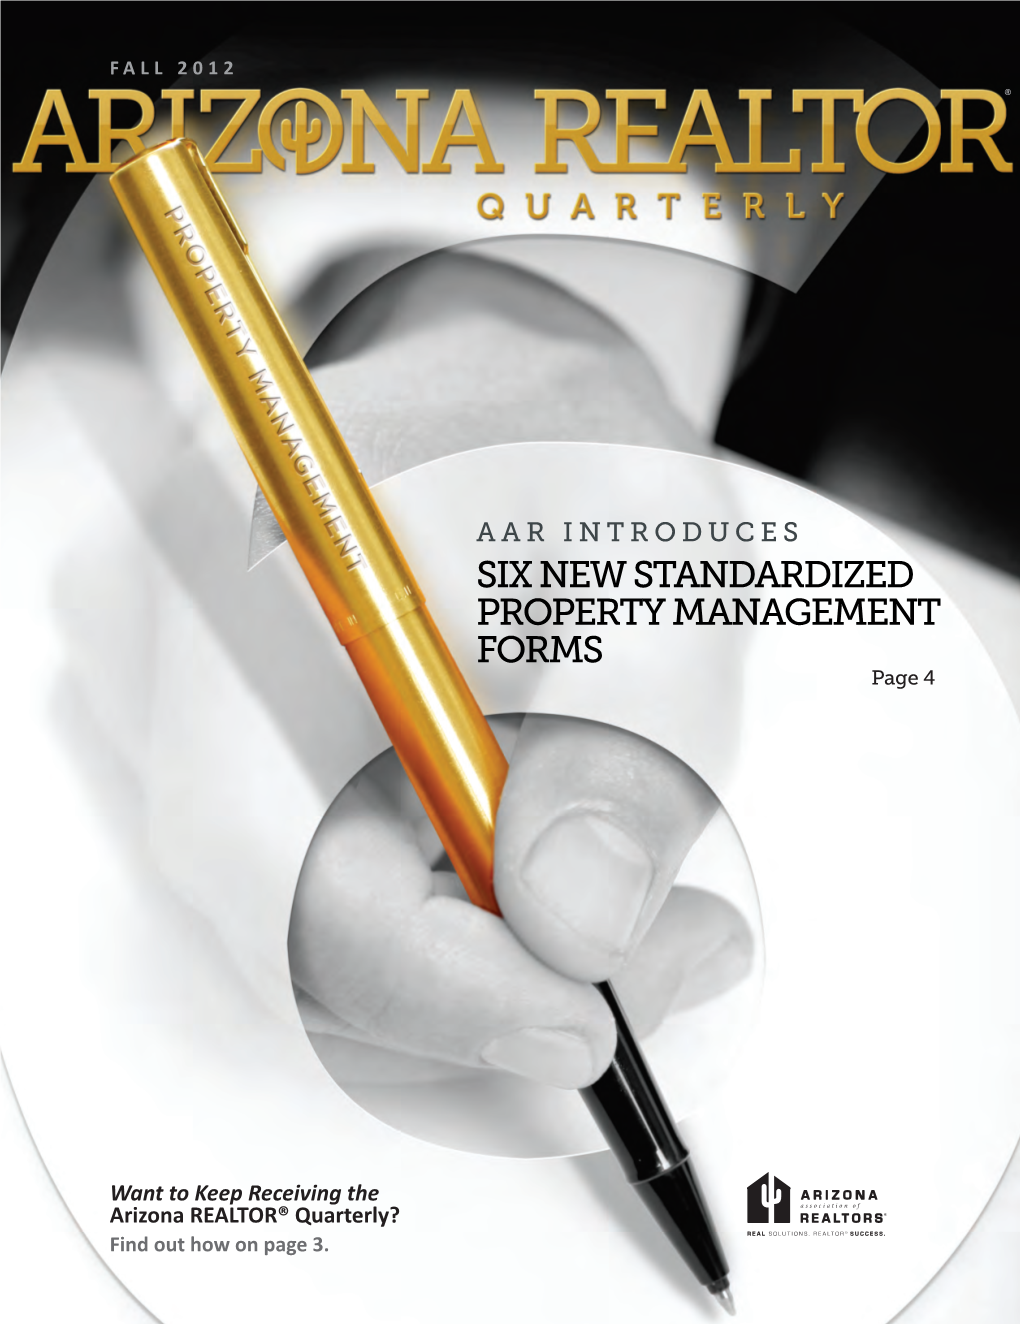 AAR INTRODUCES SIX NEW STANDARDIZED PROPERTY MANAGEMENT FORMS Page 4